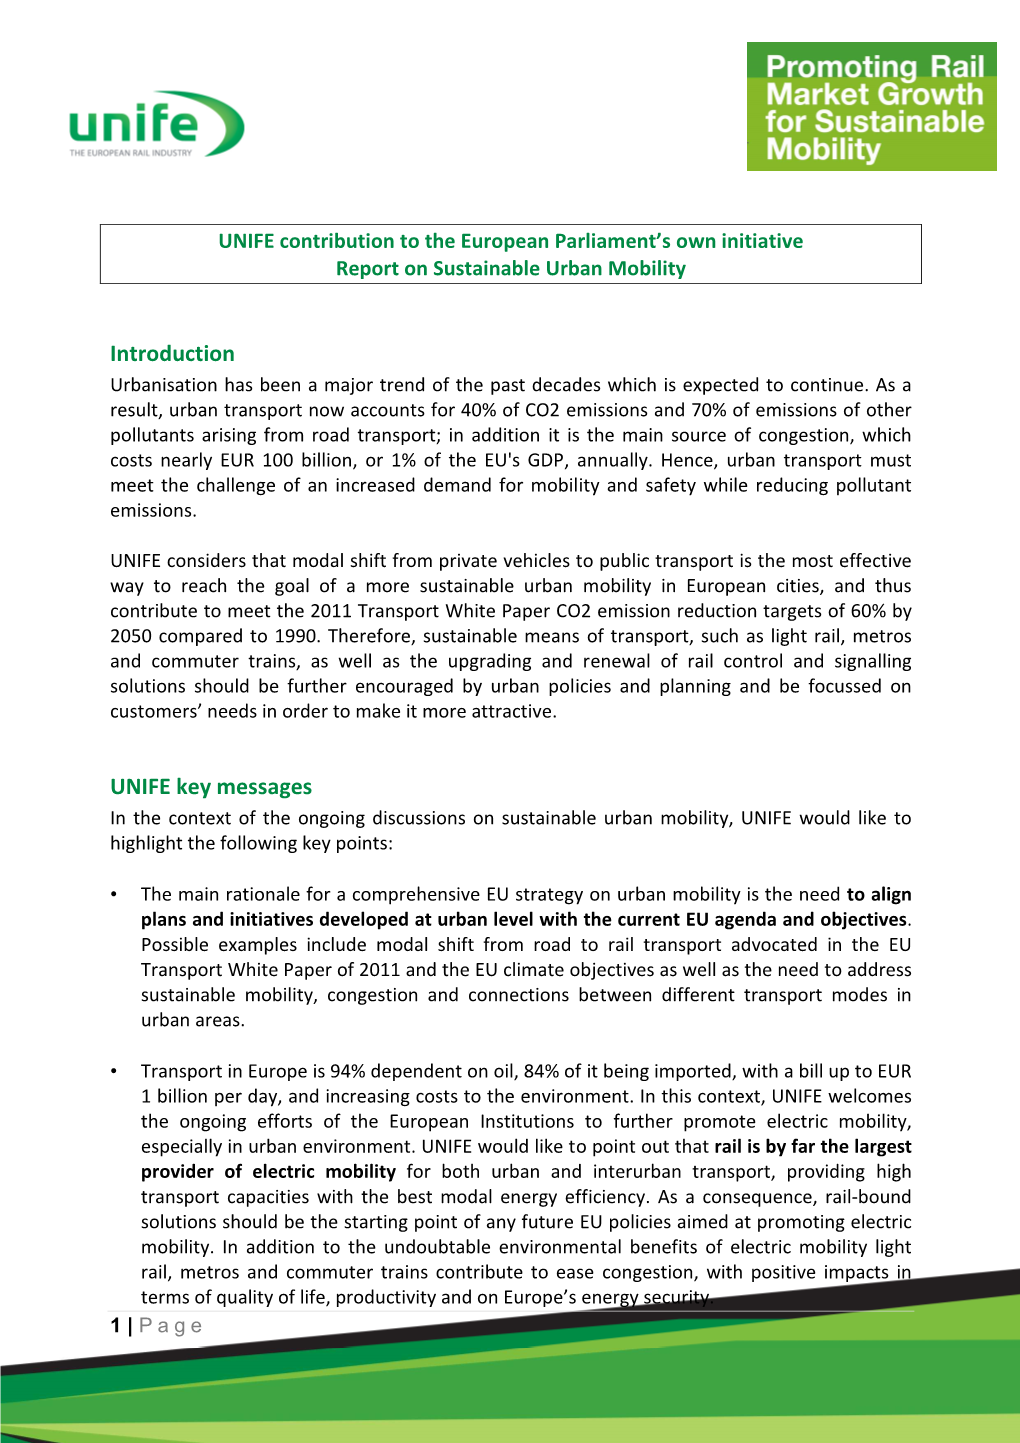 UNIFE Position Paper on Urban Mobility